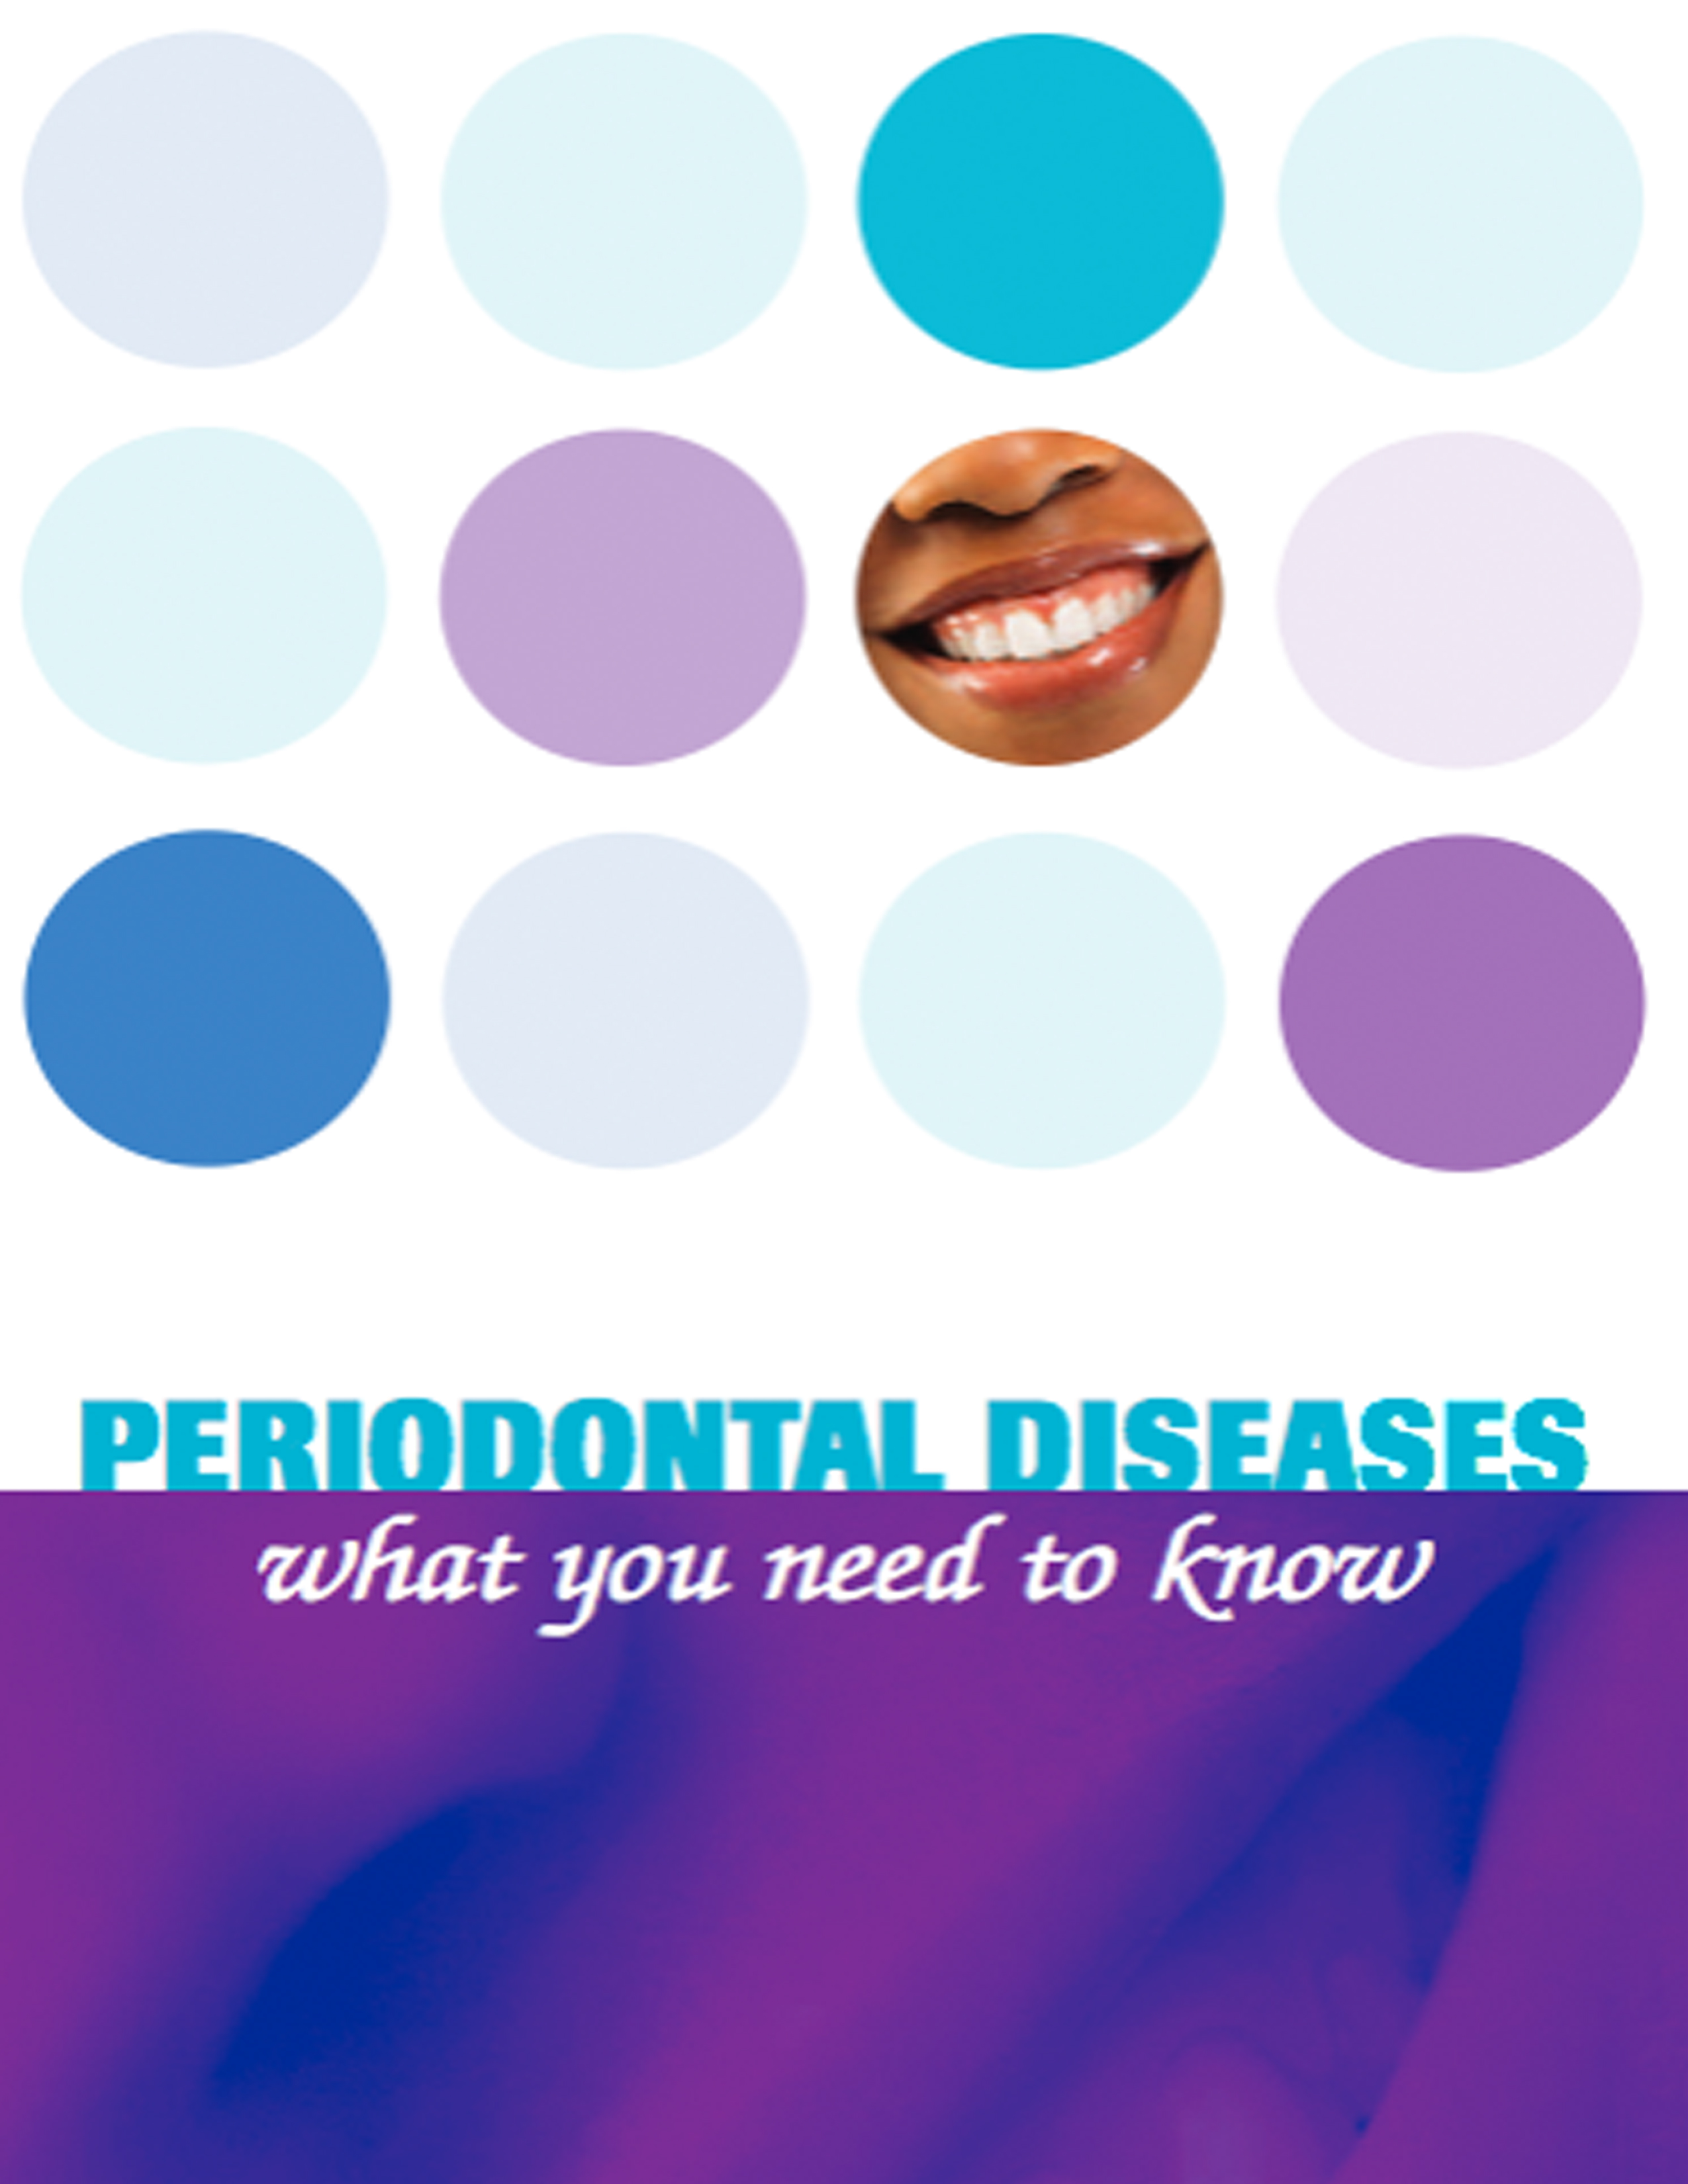 Periondontal Disease: What You Need To Know